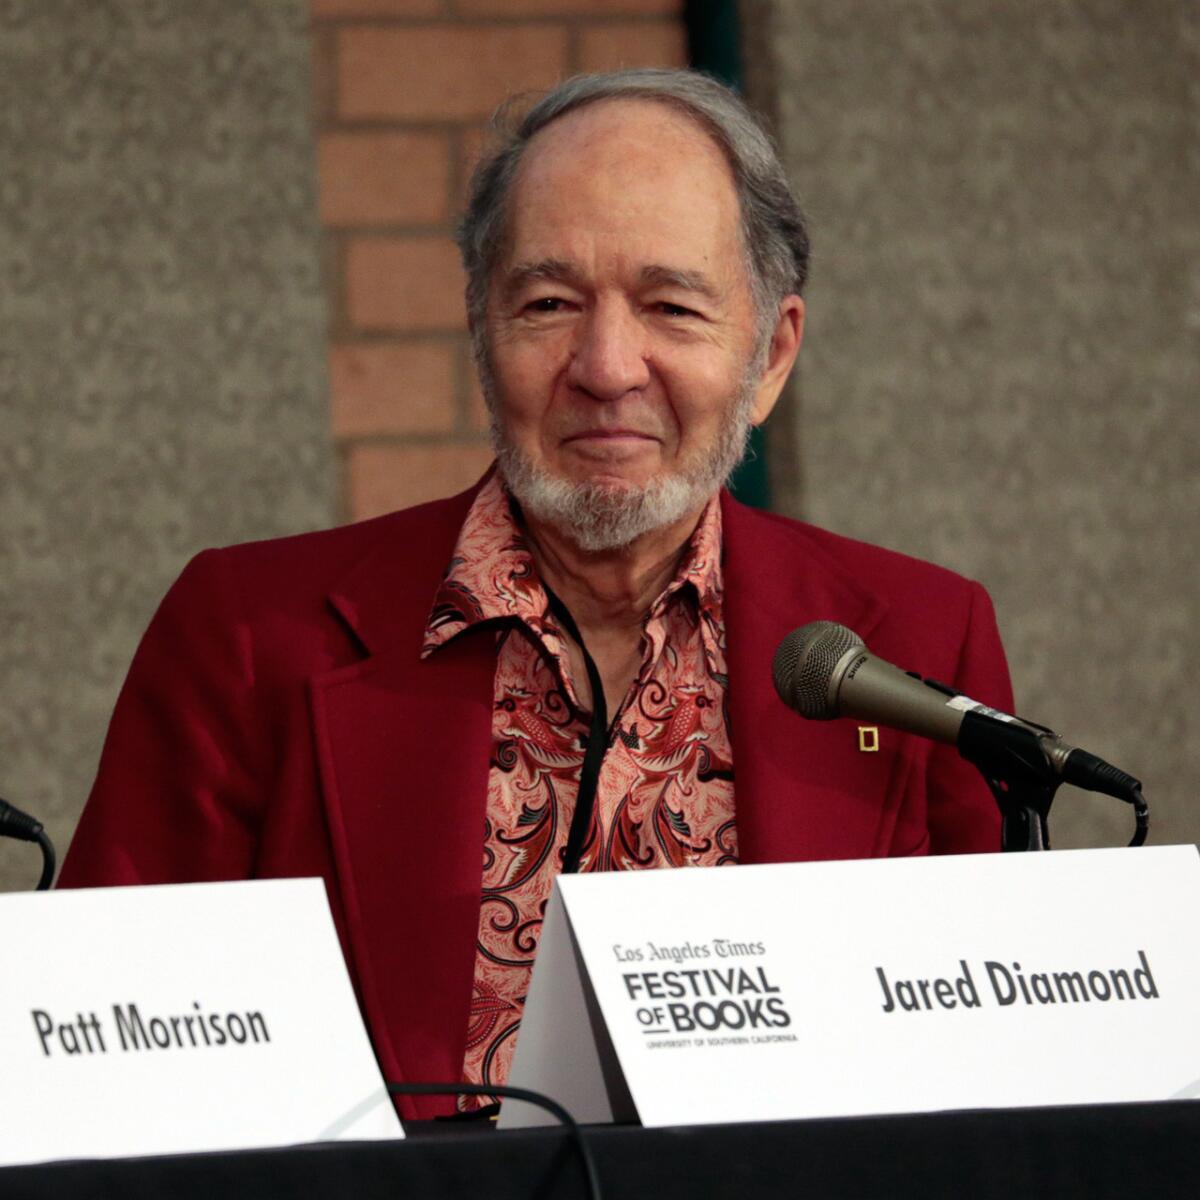 At the Festival of Books on Sunday, Jared Diamond said he's more optimistic than he was when he wrote "Guns, Germs, and Steel" in 1997 or "Collapse" in 2005.